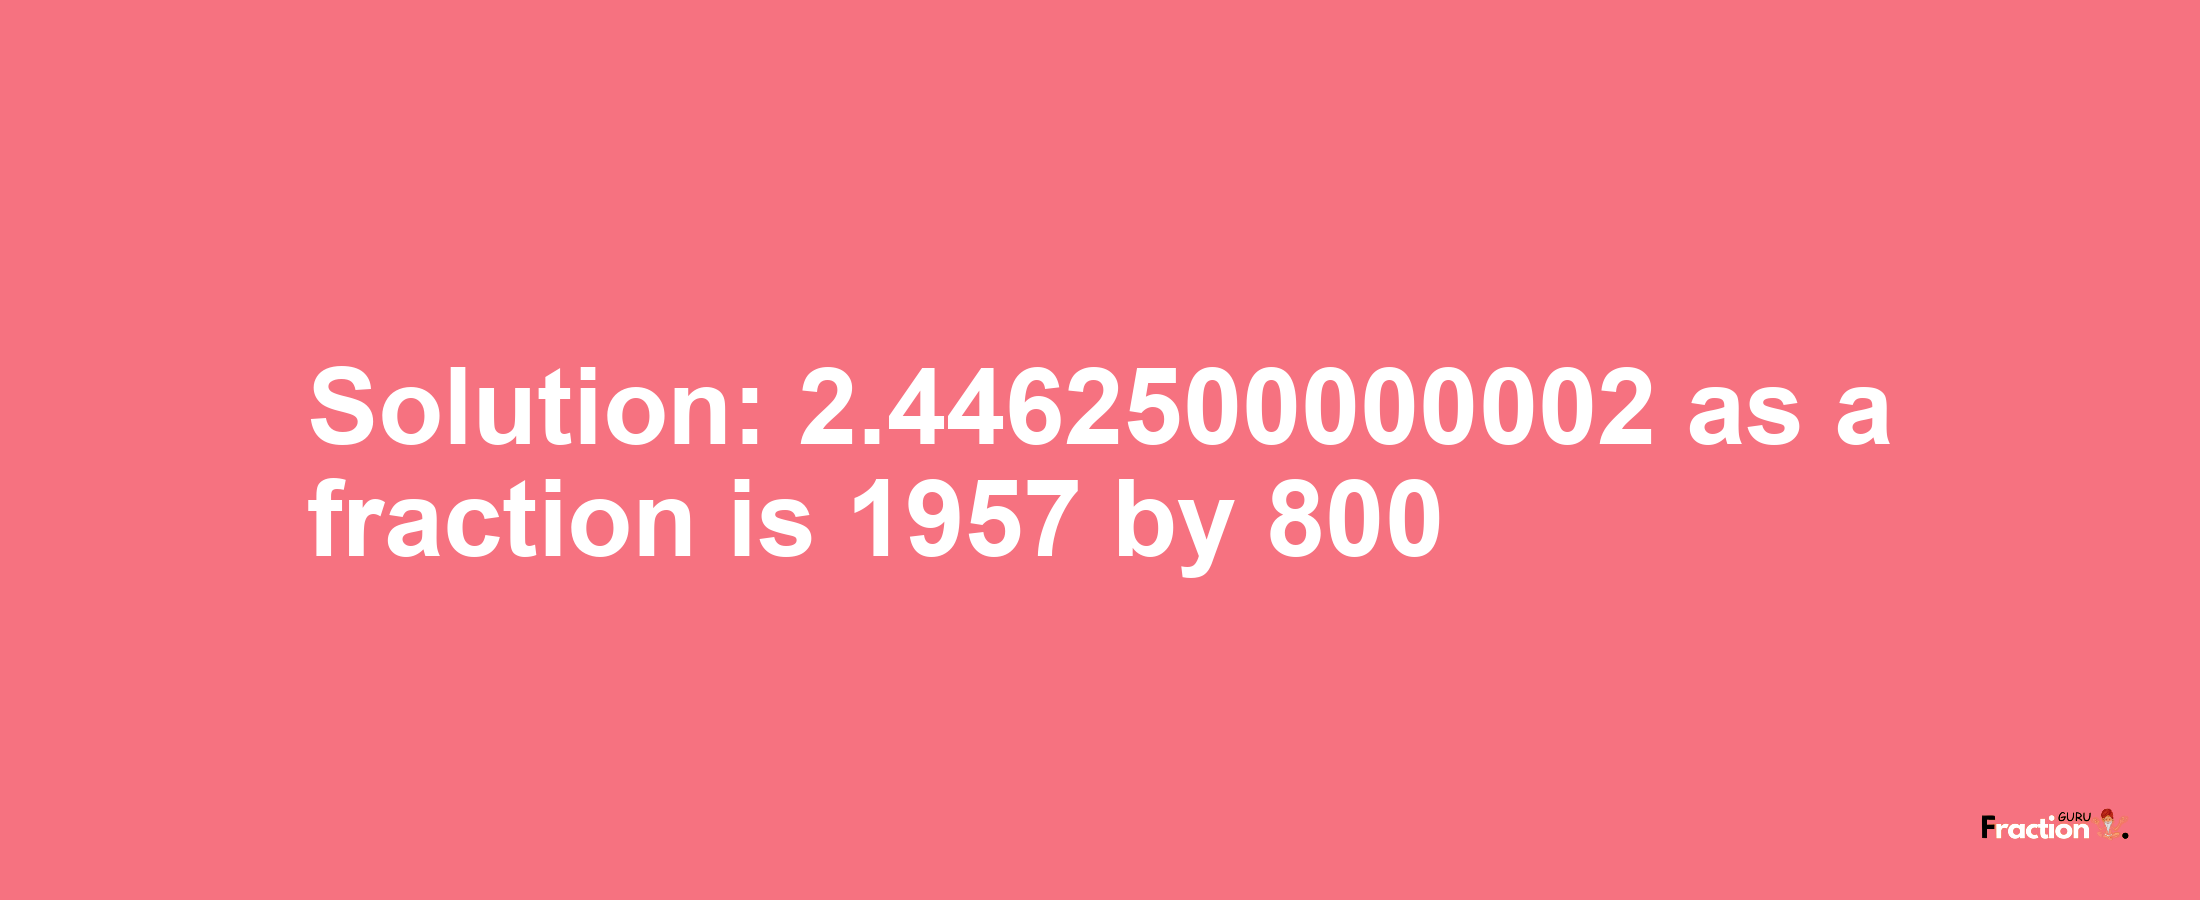 Solution:2.4462500000002 as a fraction is 1957/800